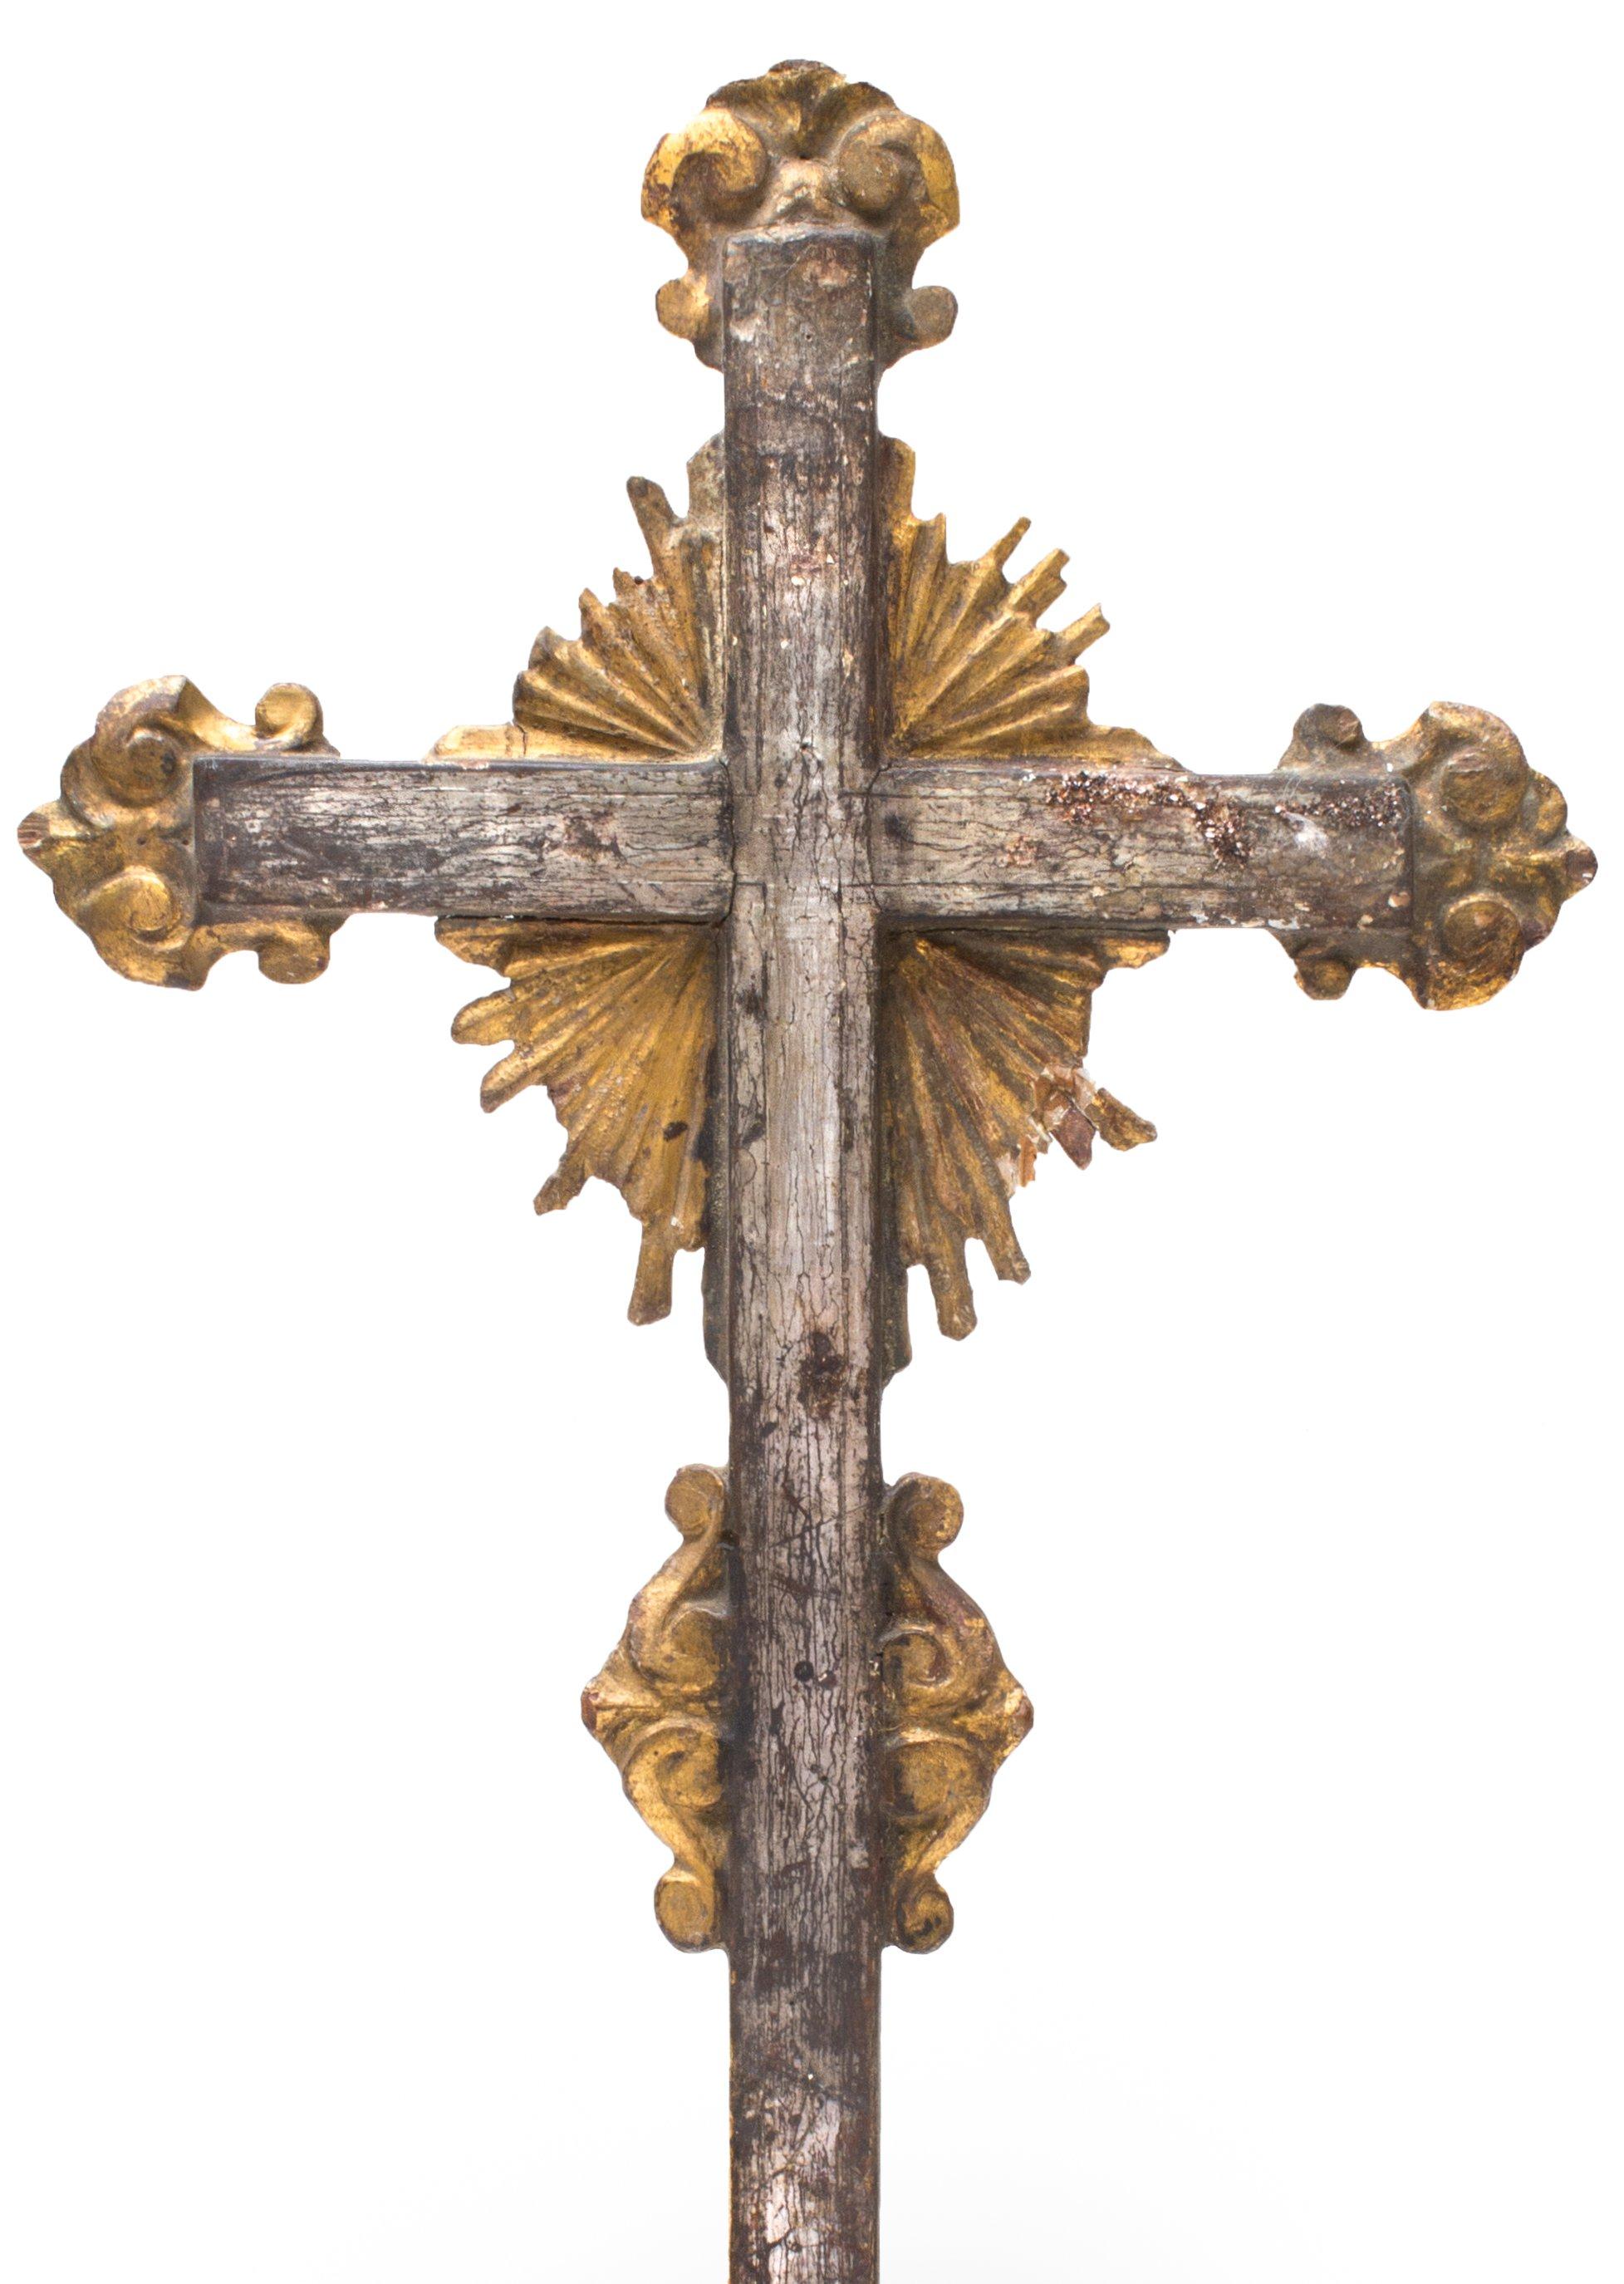 18th century Italian crucifix on a tourmaline base with mica inclusions and silver plated kyanite. The magnificent silver leaf crucifix is outlined with gold leaf sunrays. It has elaborate details because it comes from important church in the